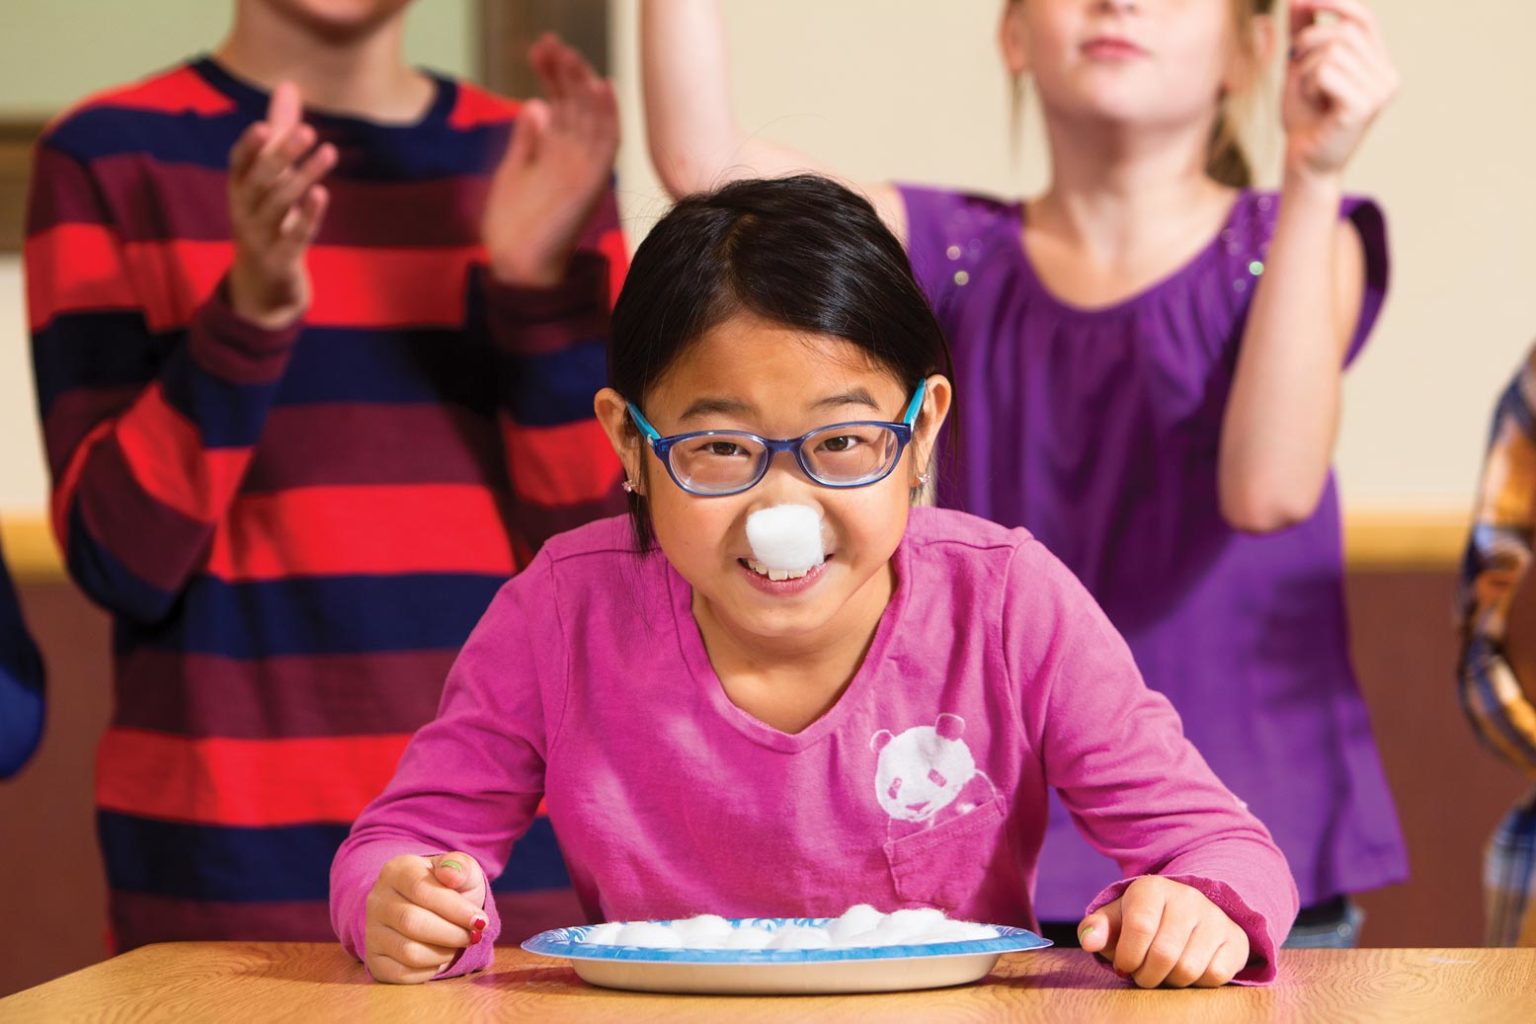 Little girl wearing glasses is smiling as she sits in front of a plate of cotton balls. One cotton ball is stuck to her noise. Her teammates are cheering behind her.